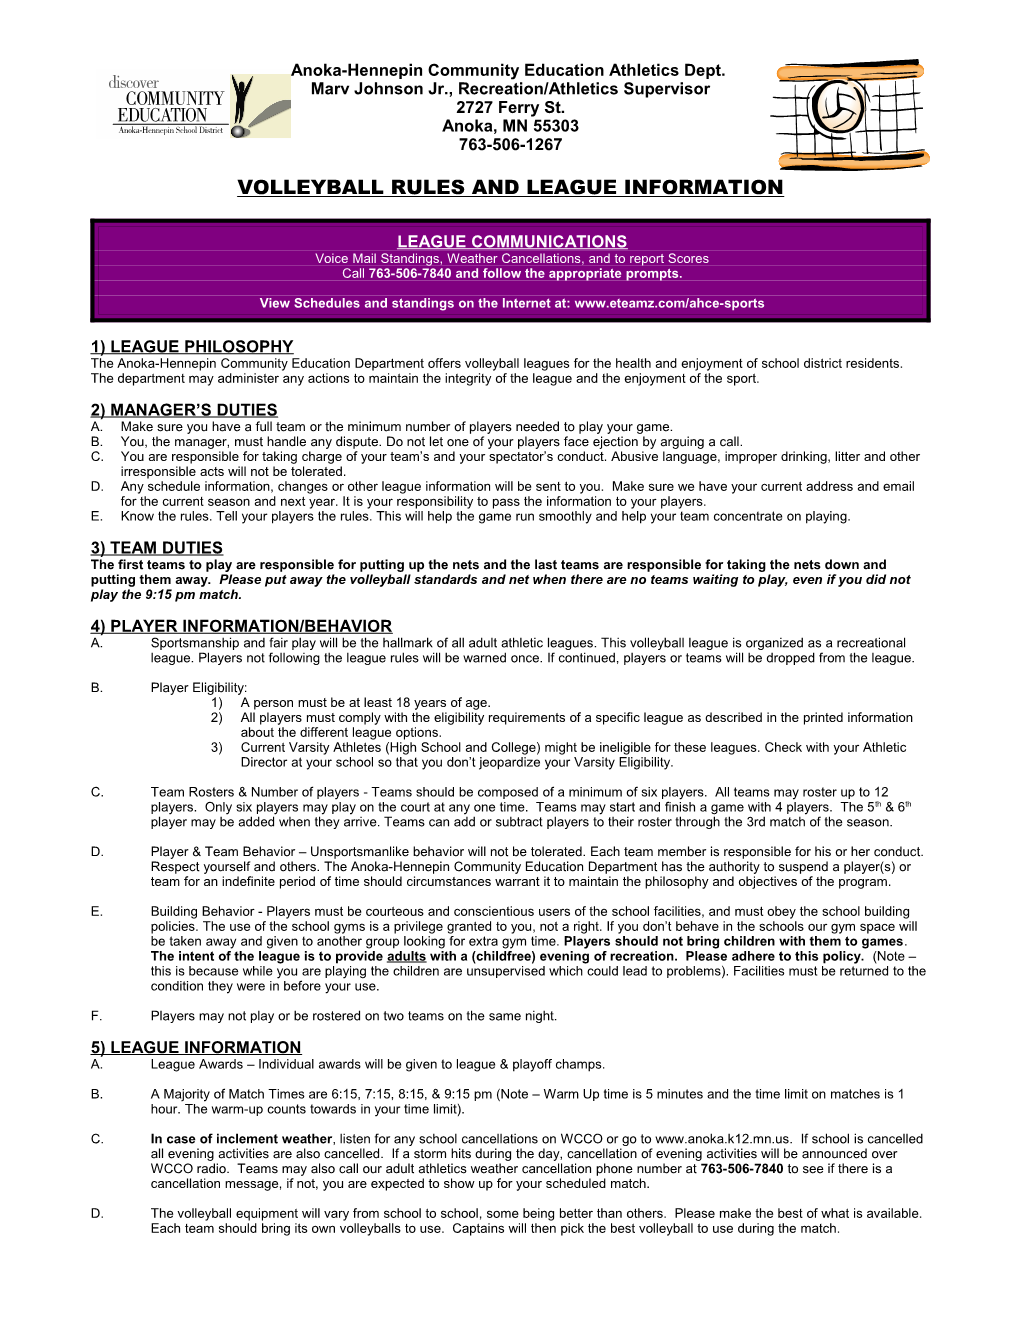 Volleyball Rules & Regulations